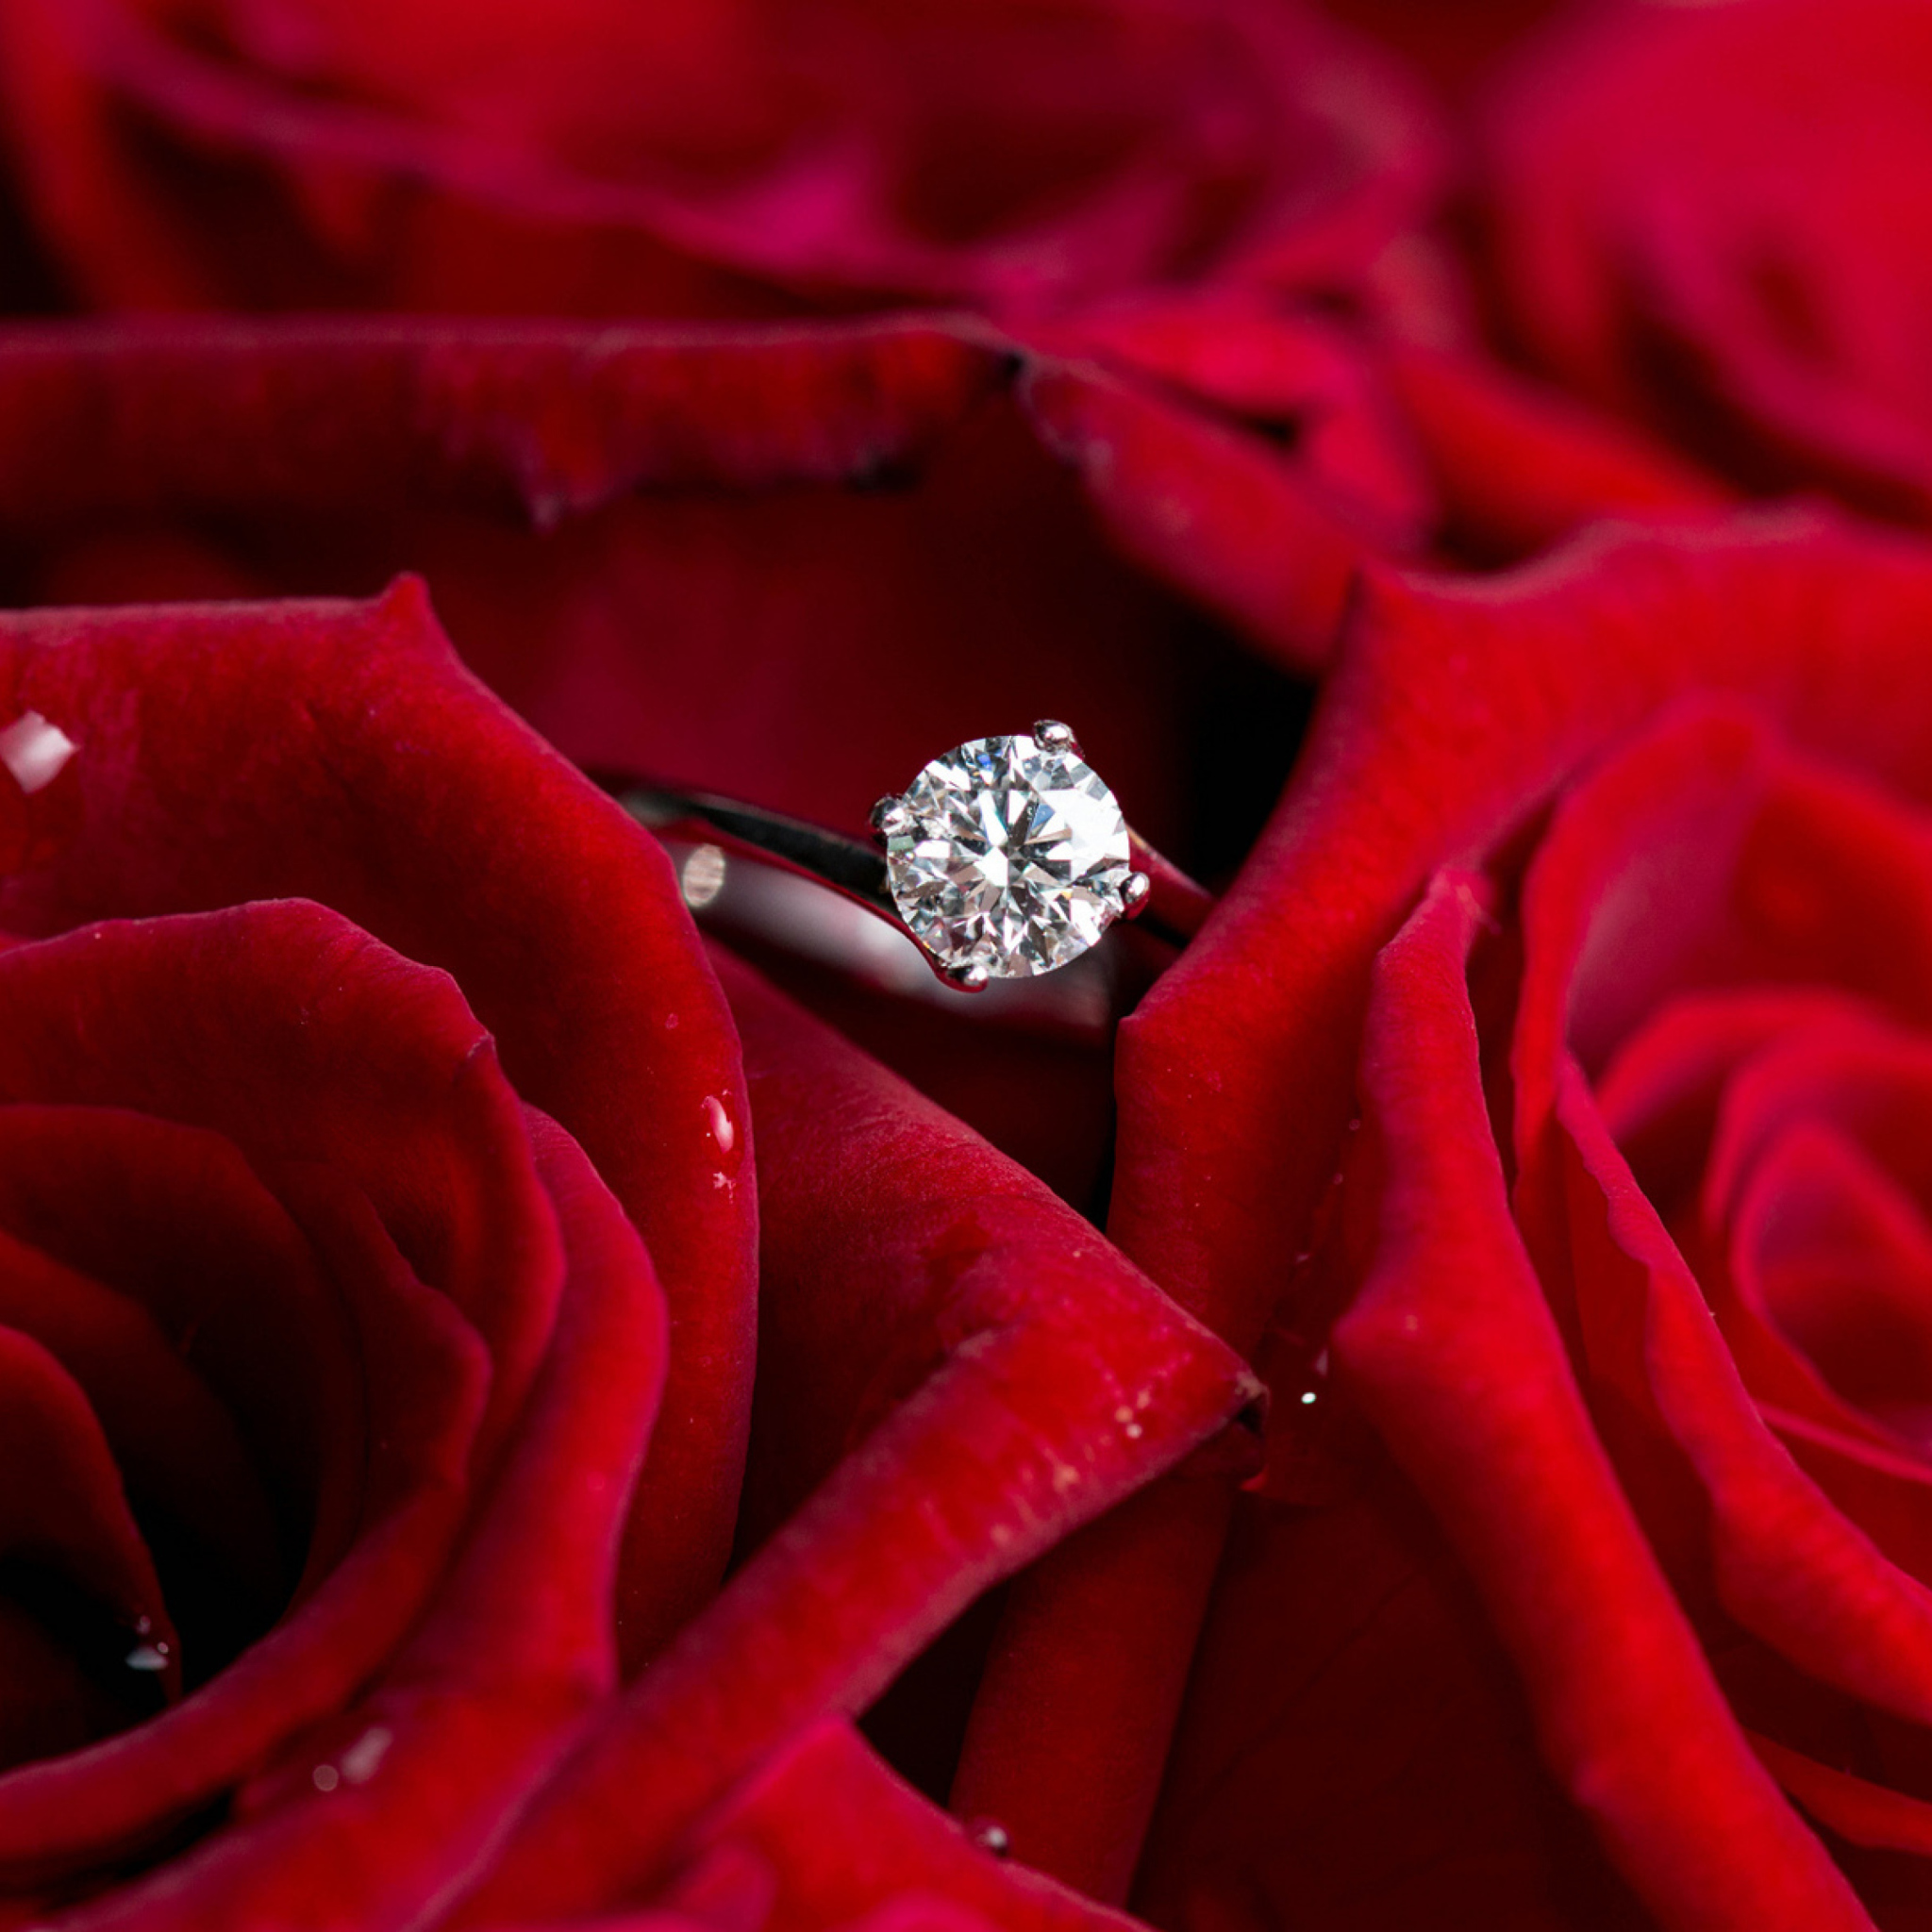 Diamond Ring And Roses wallpaper 2048x2048